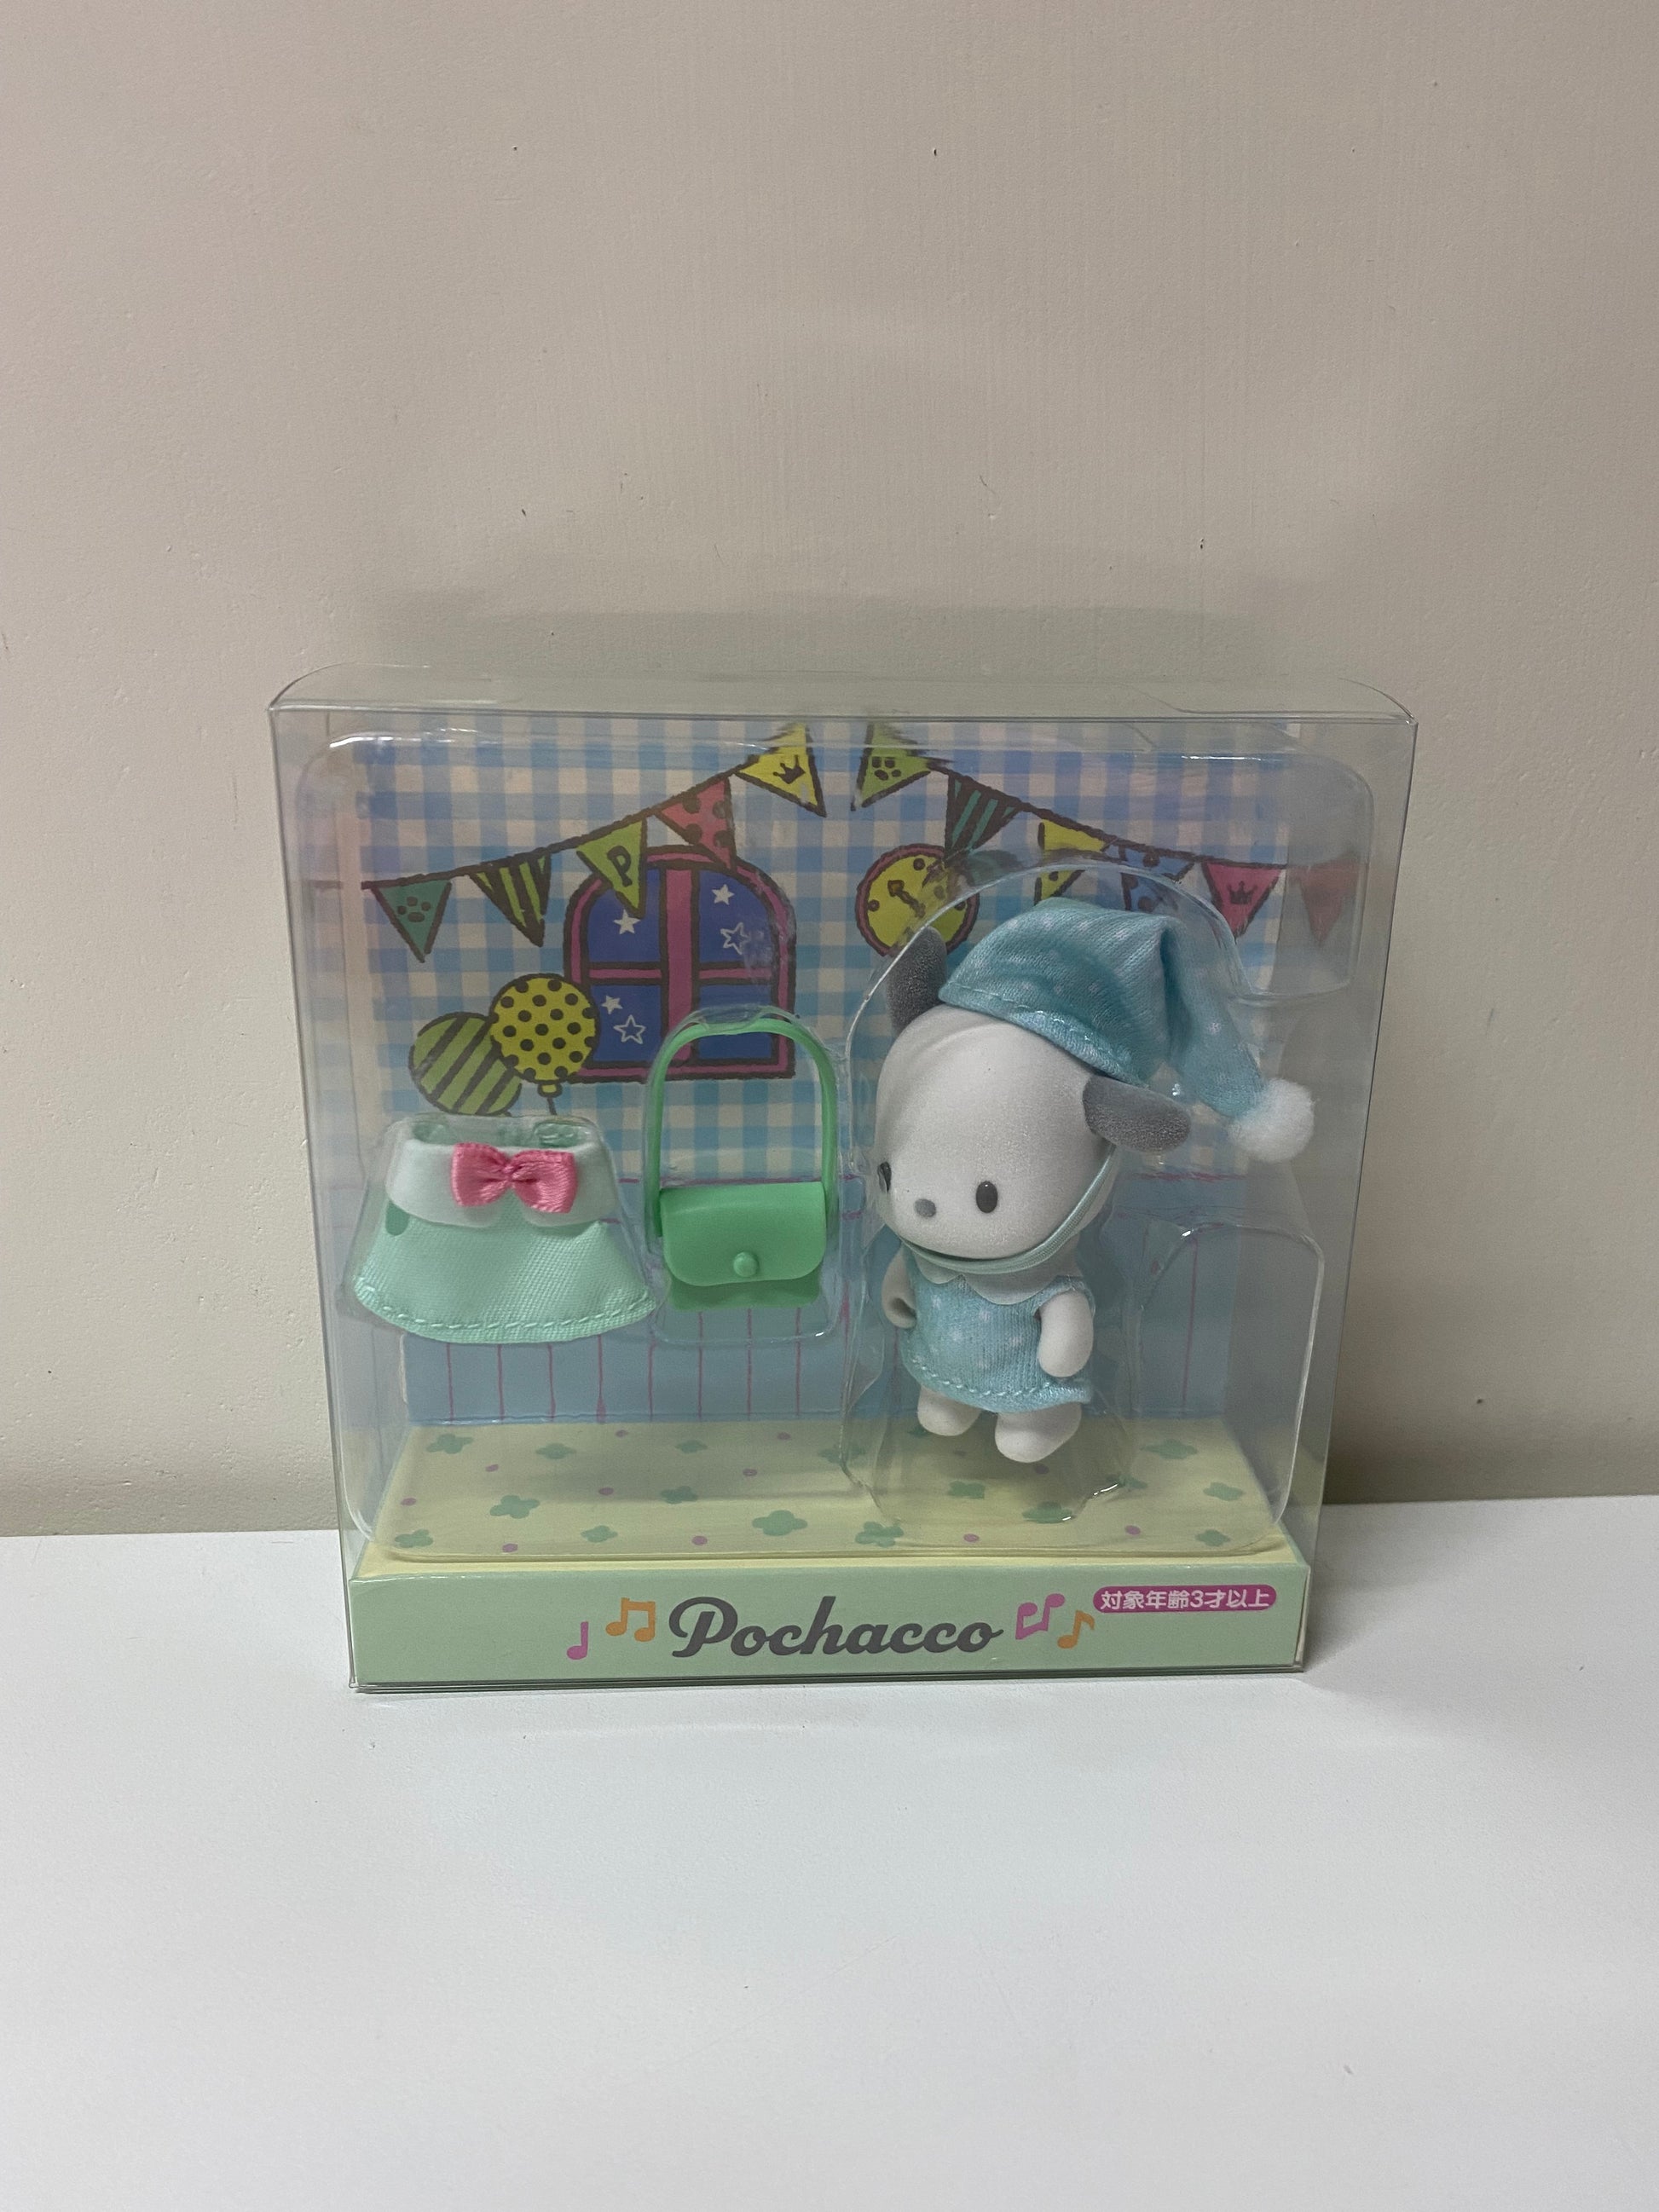 Japan Sanrio Pochacco Little Pajamas Mini Doll Toy Collections